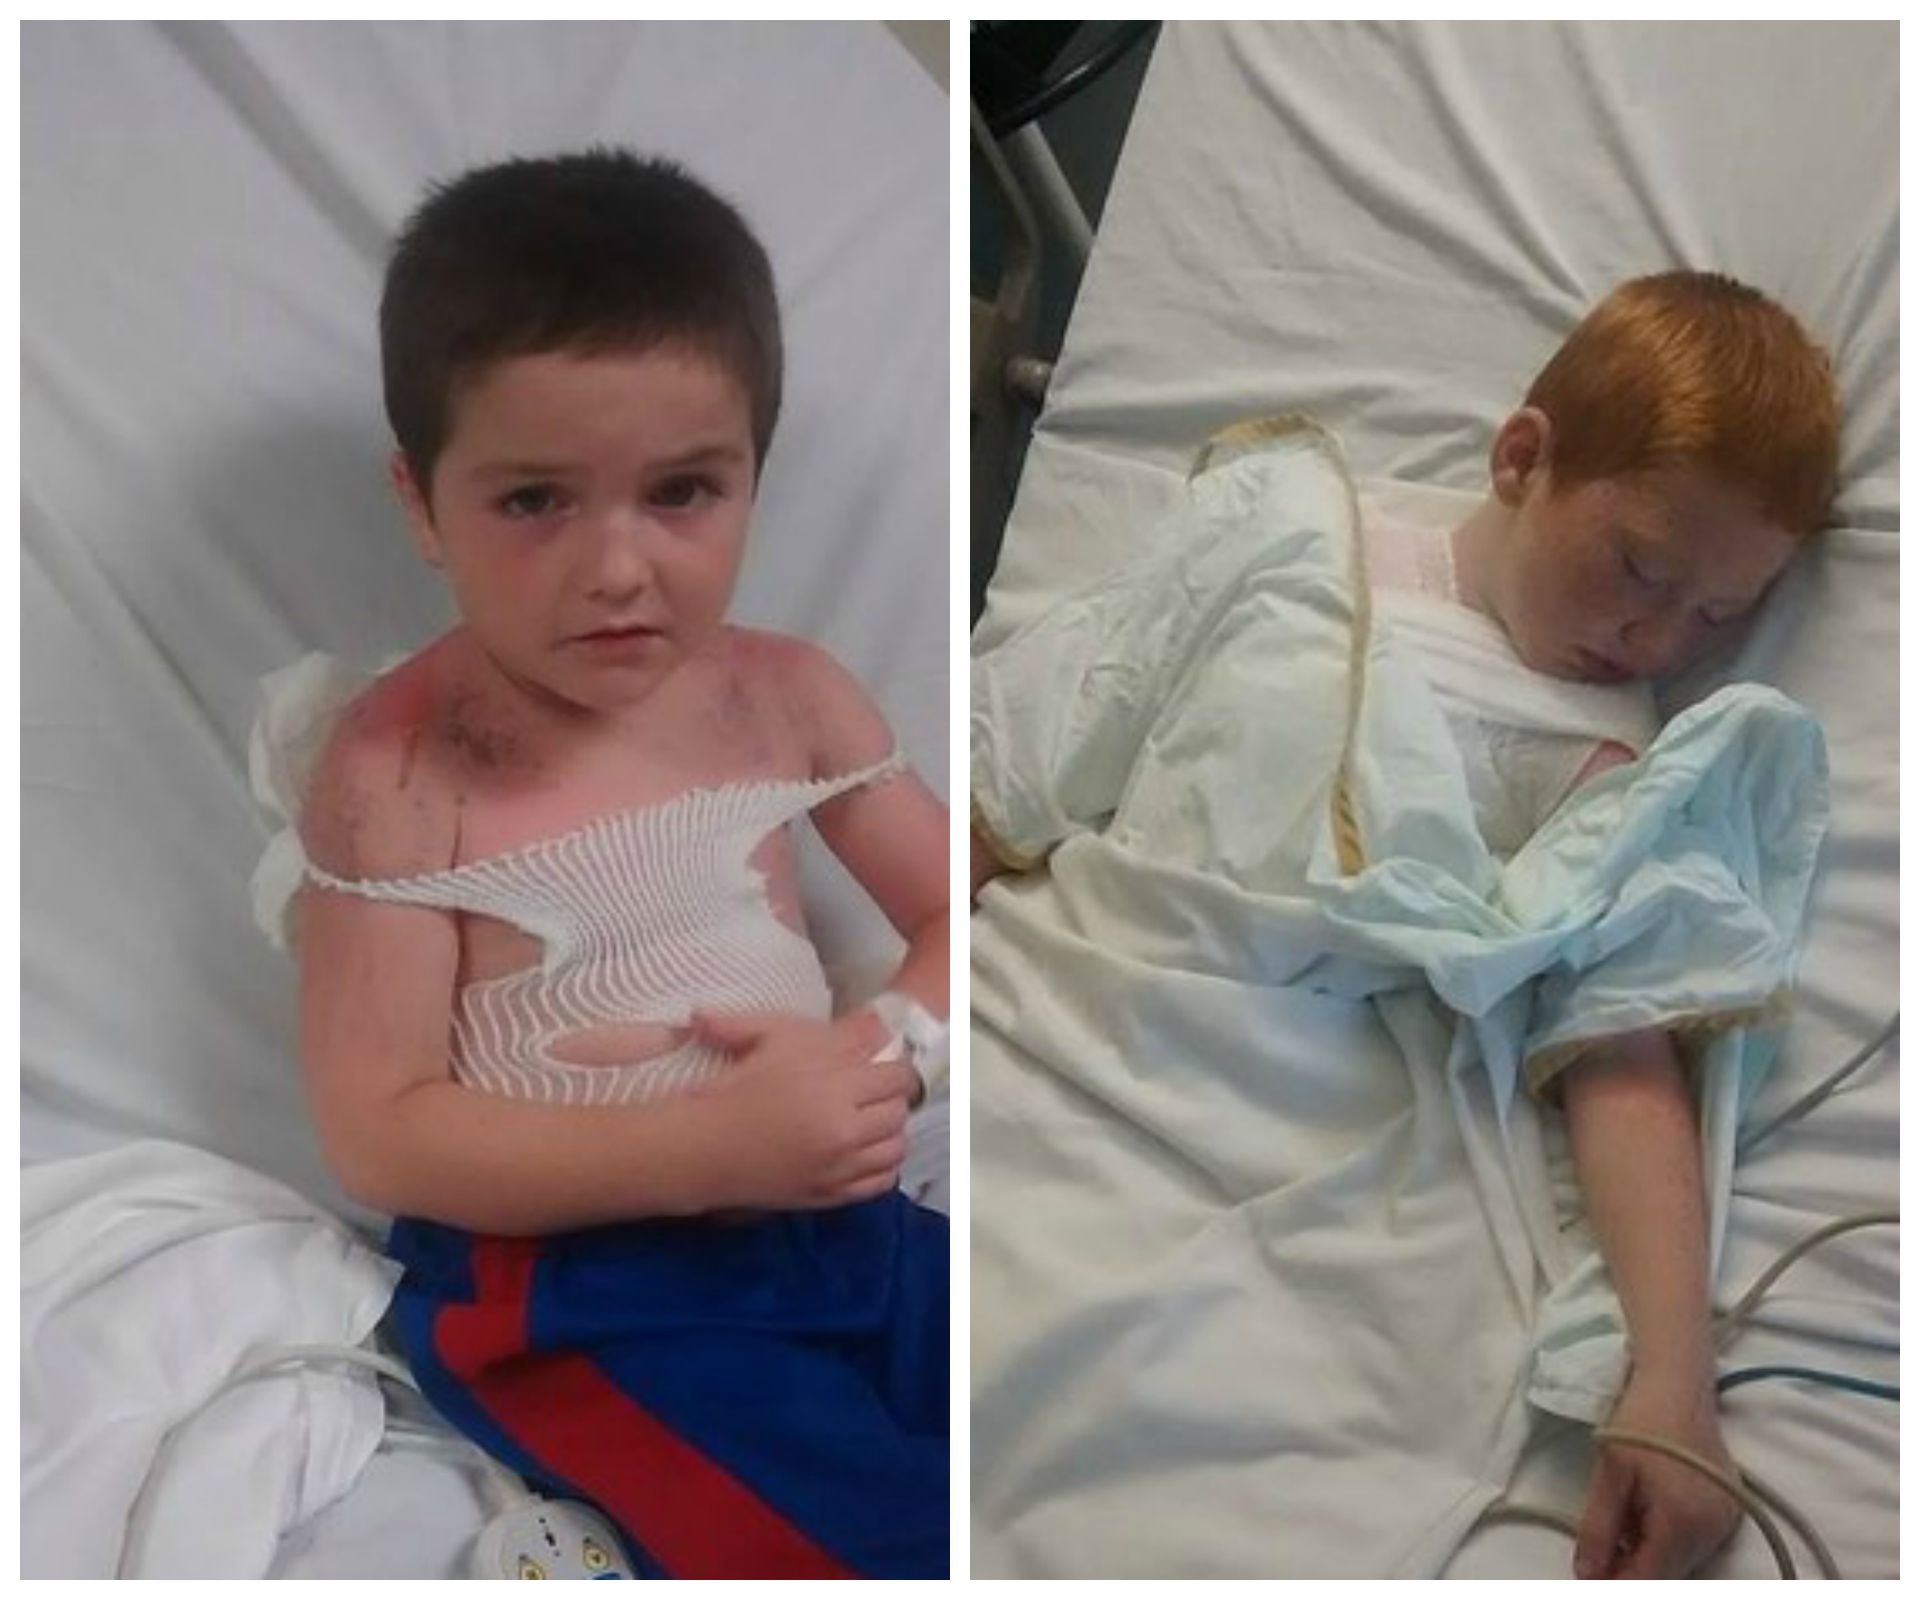 Boys suffer third degree burns at daycare